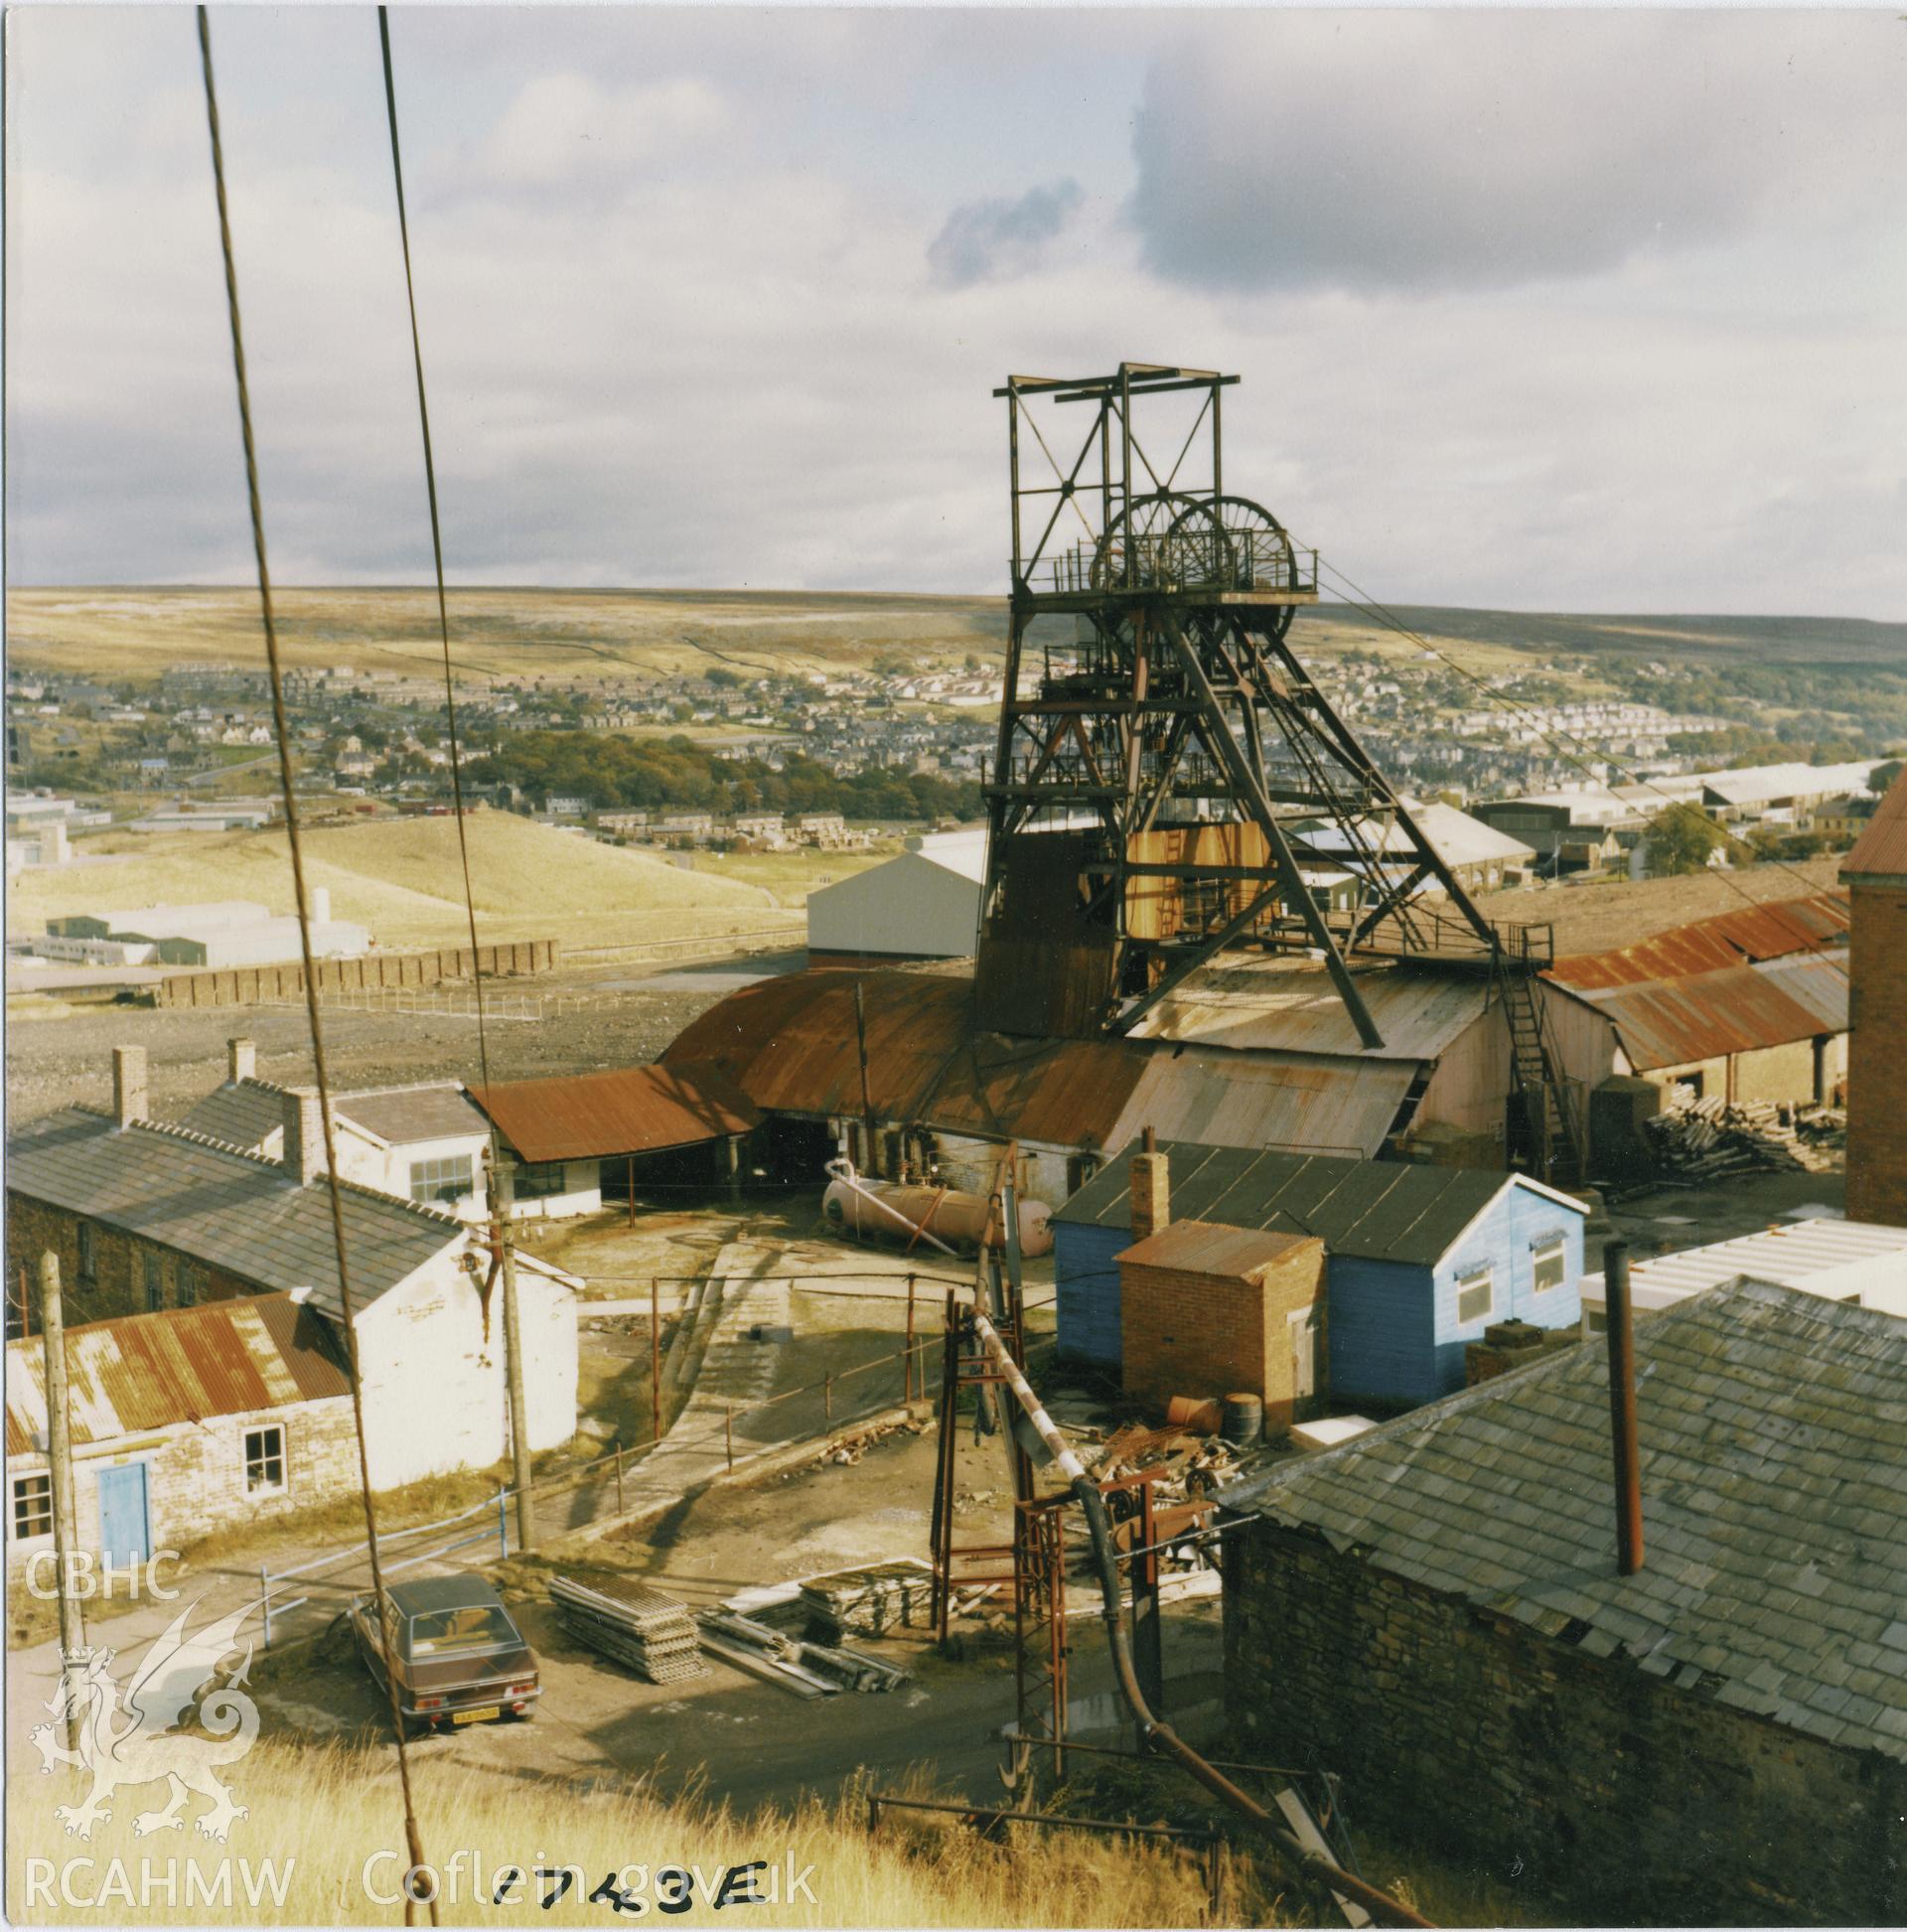 Looking down on the pit head, pre museum (Cornwell ref: 1743E). NA/MM/91/121e